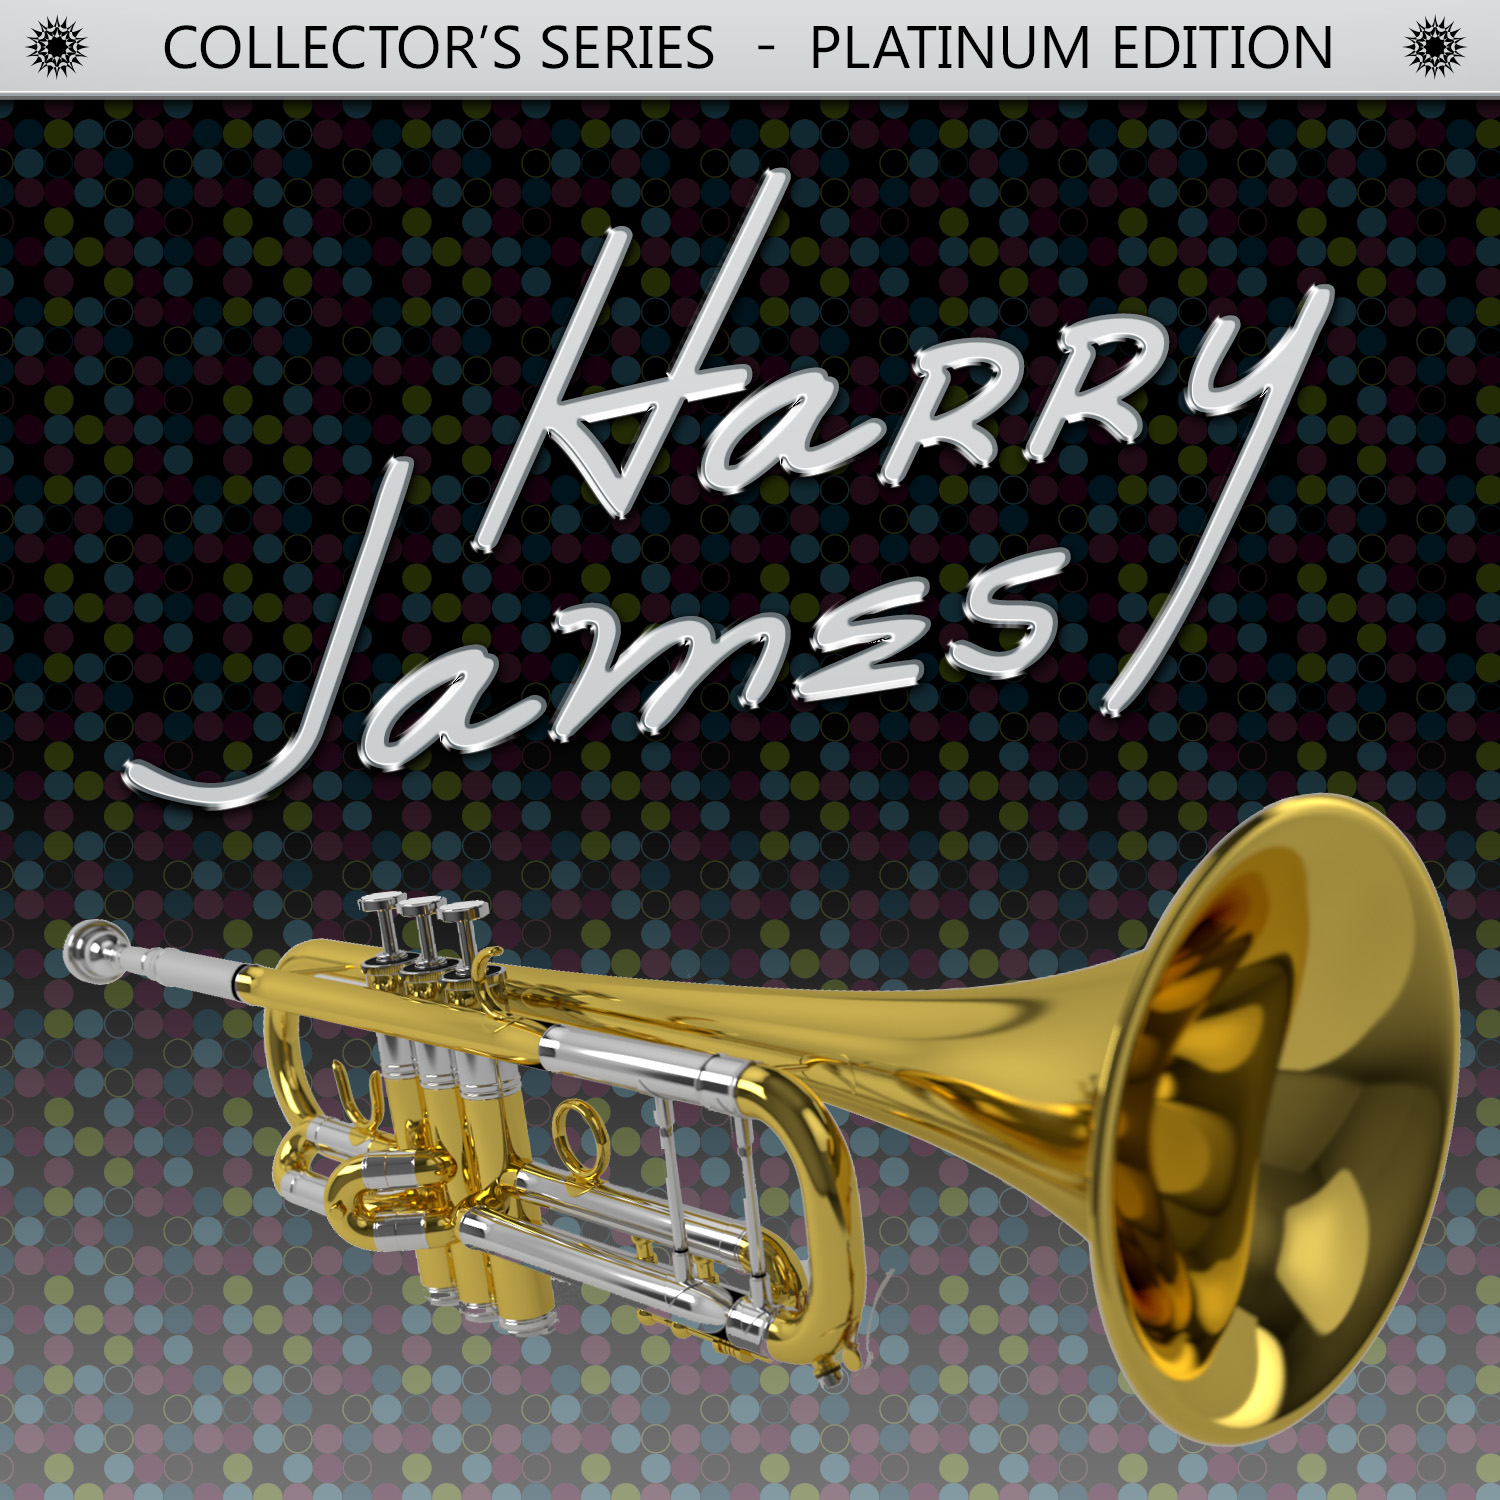 Collector's Series - Platinum Edition: Harry James by Harry James